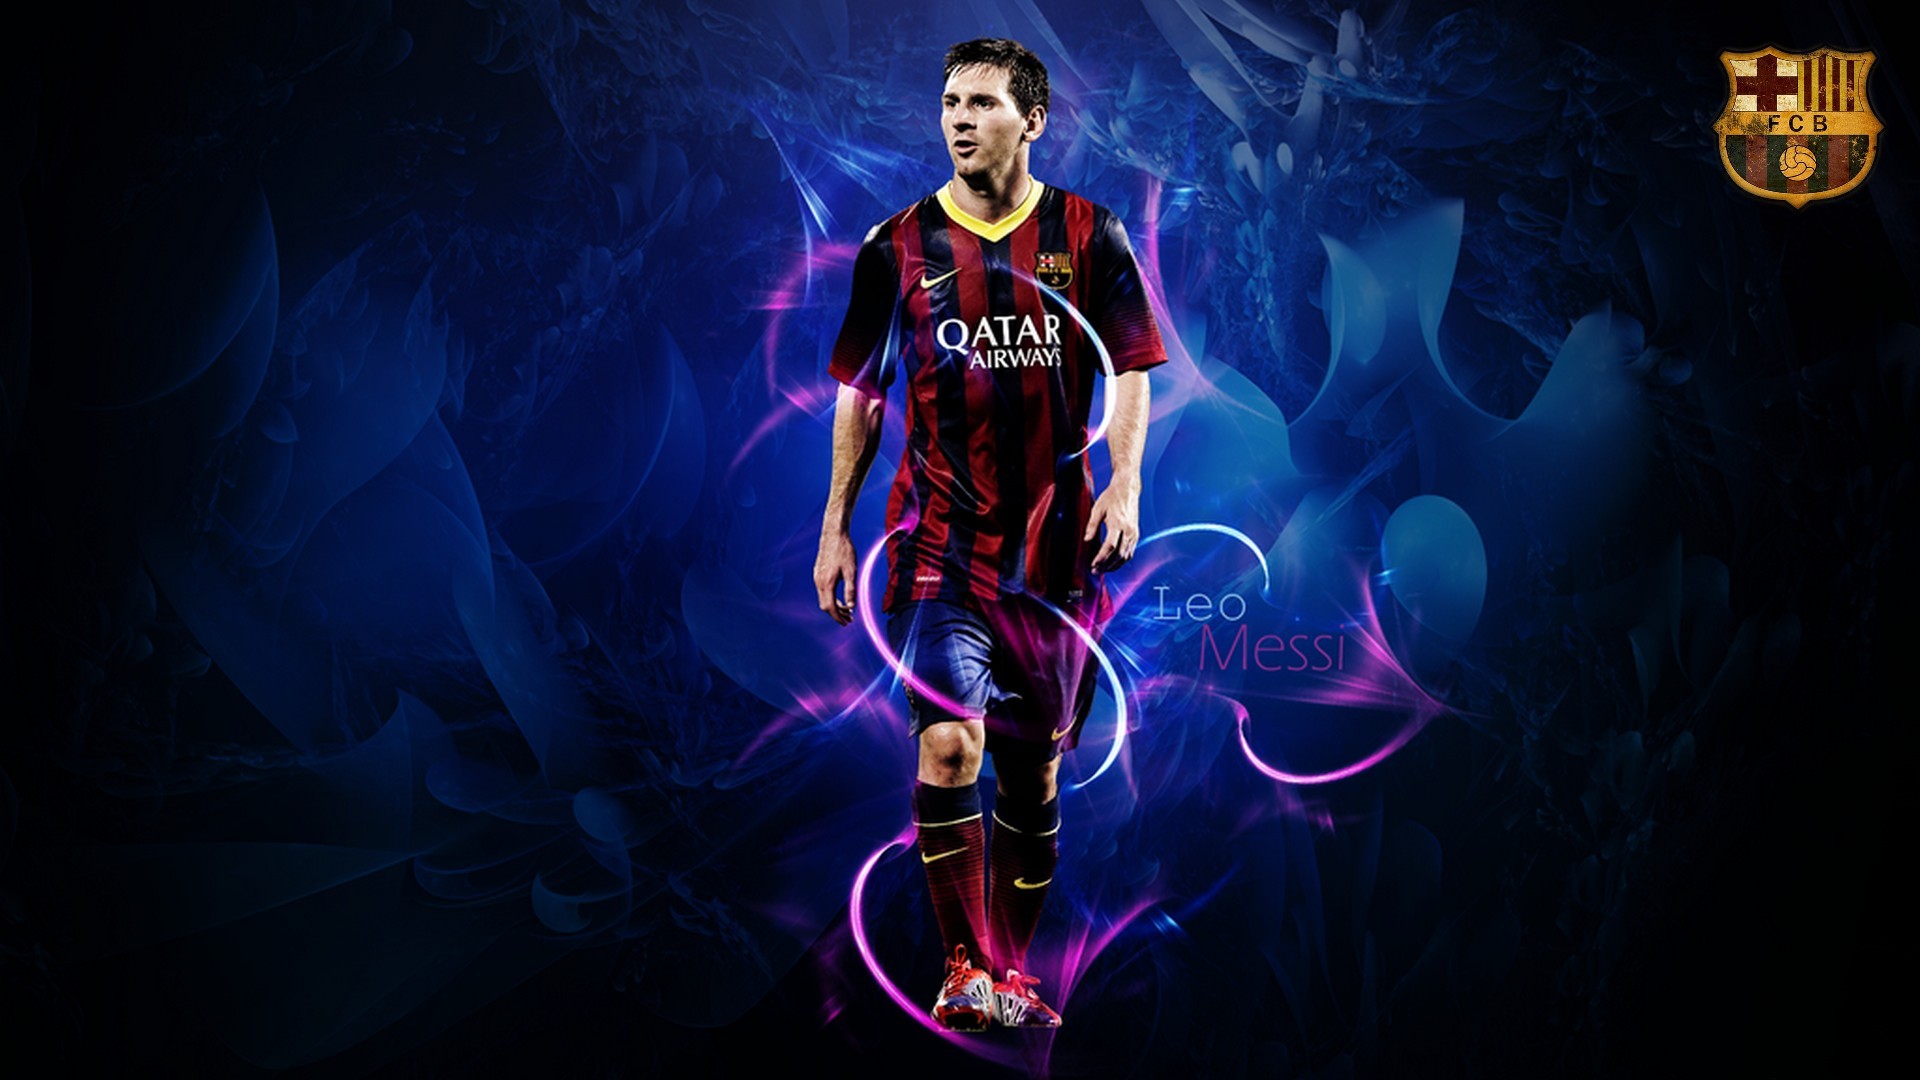 Wallpapers Leo Messi with resolution 1920x1080 pixel. You can make this wallpaper for your Mac or Windows Desktop Background, iPhone, Android or Tablet and another Smartphone device